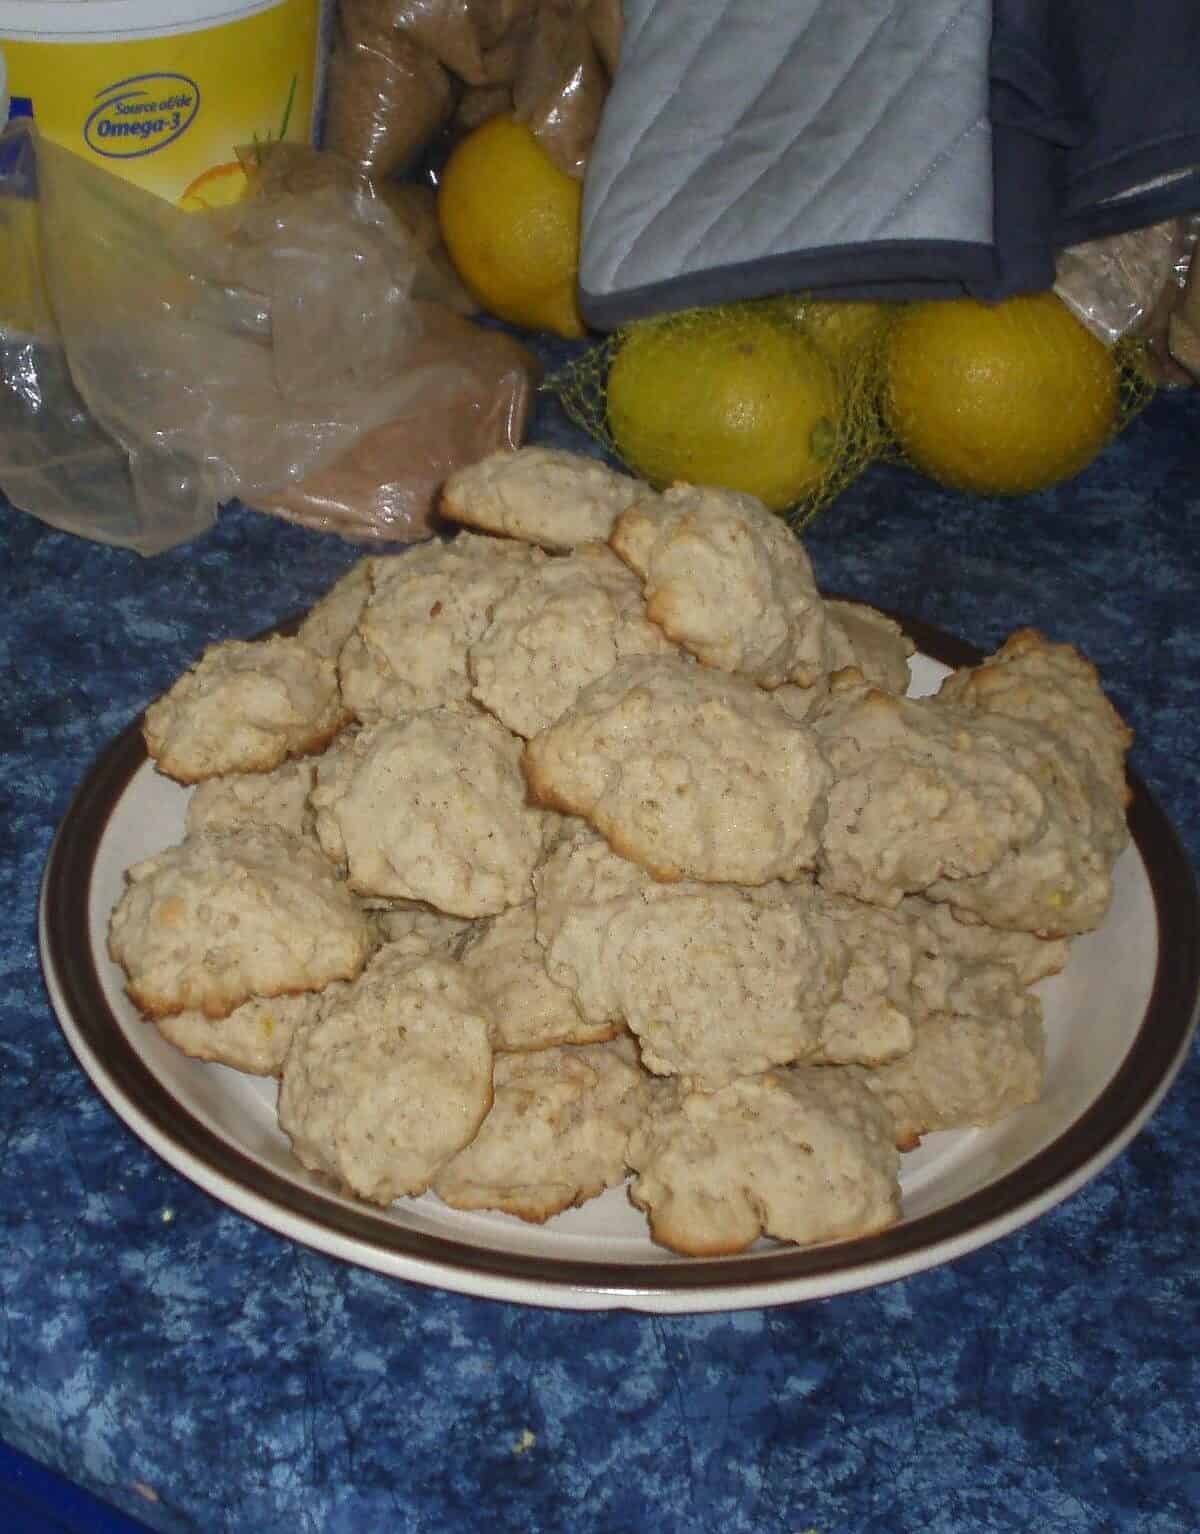  These cookies pack a punch with zesty ginger.